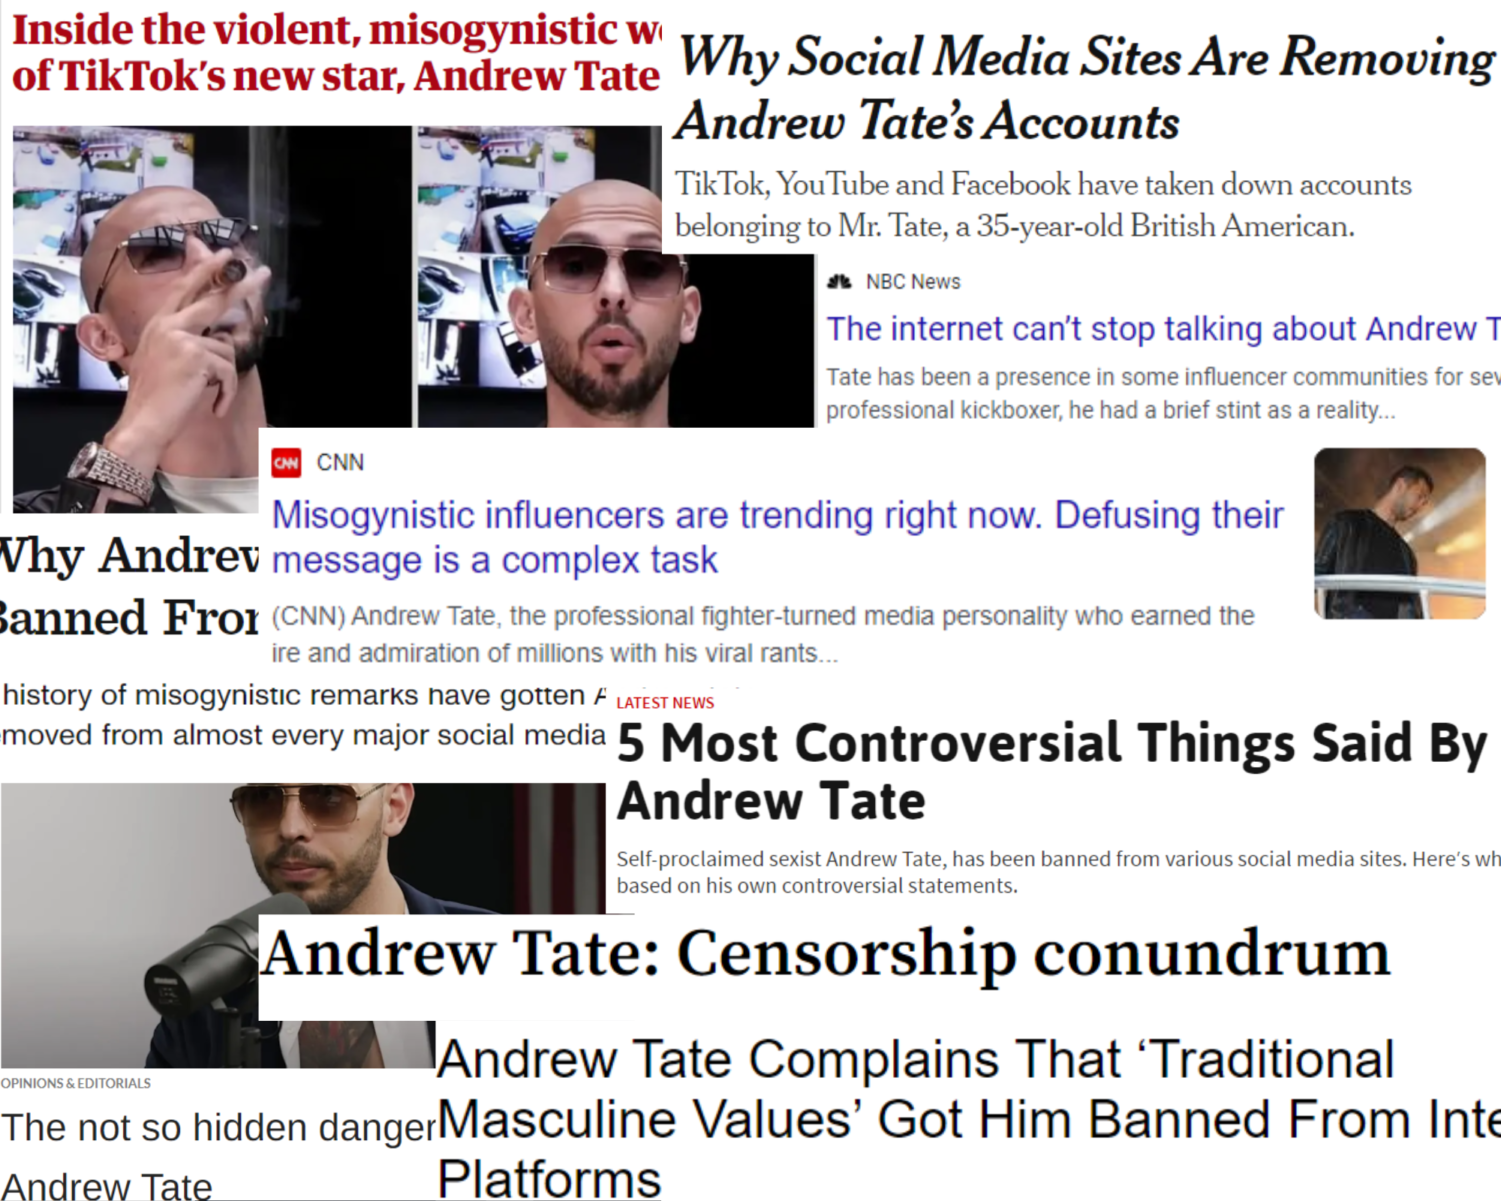 Who Is Andrew Tate And Why Is He Going Viral?